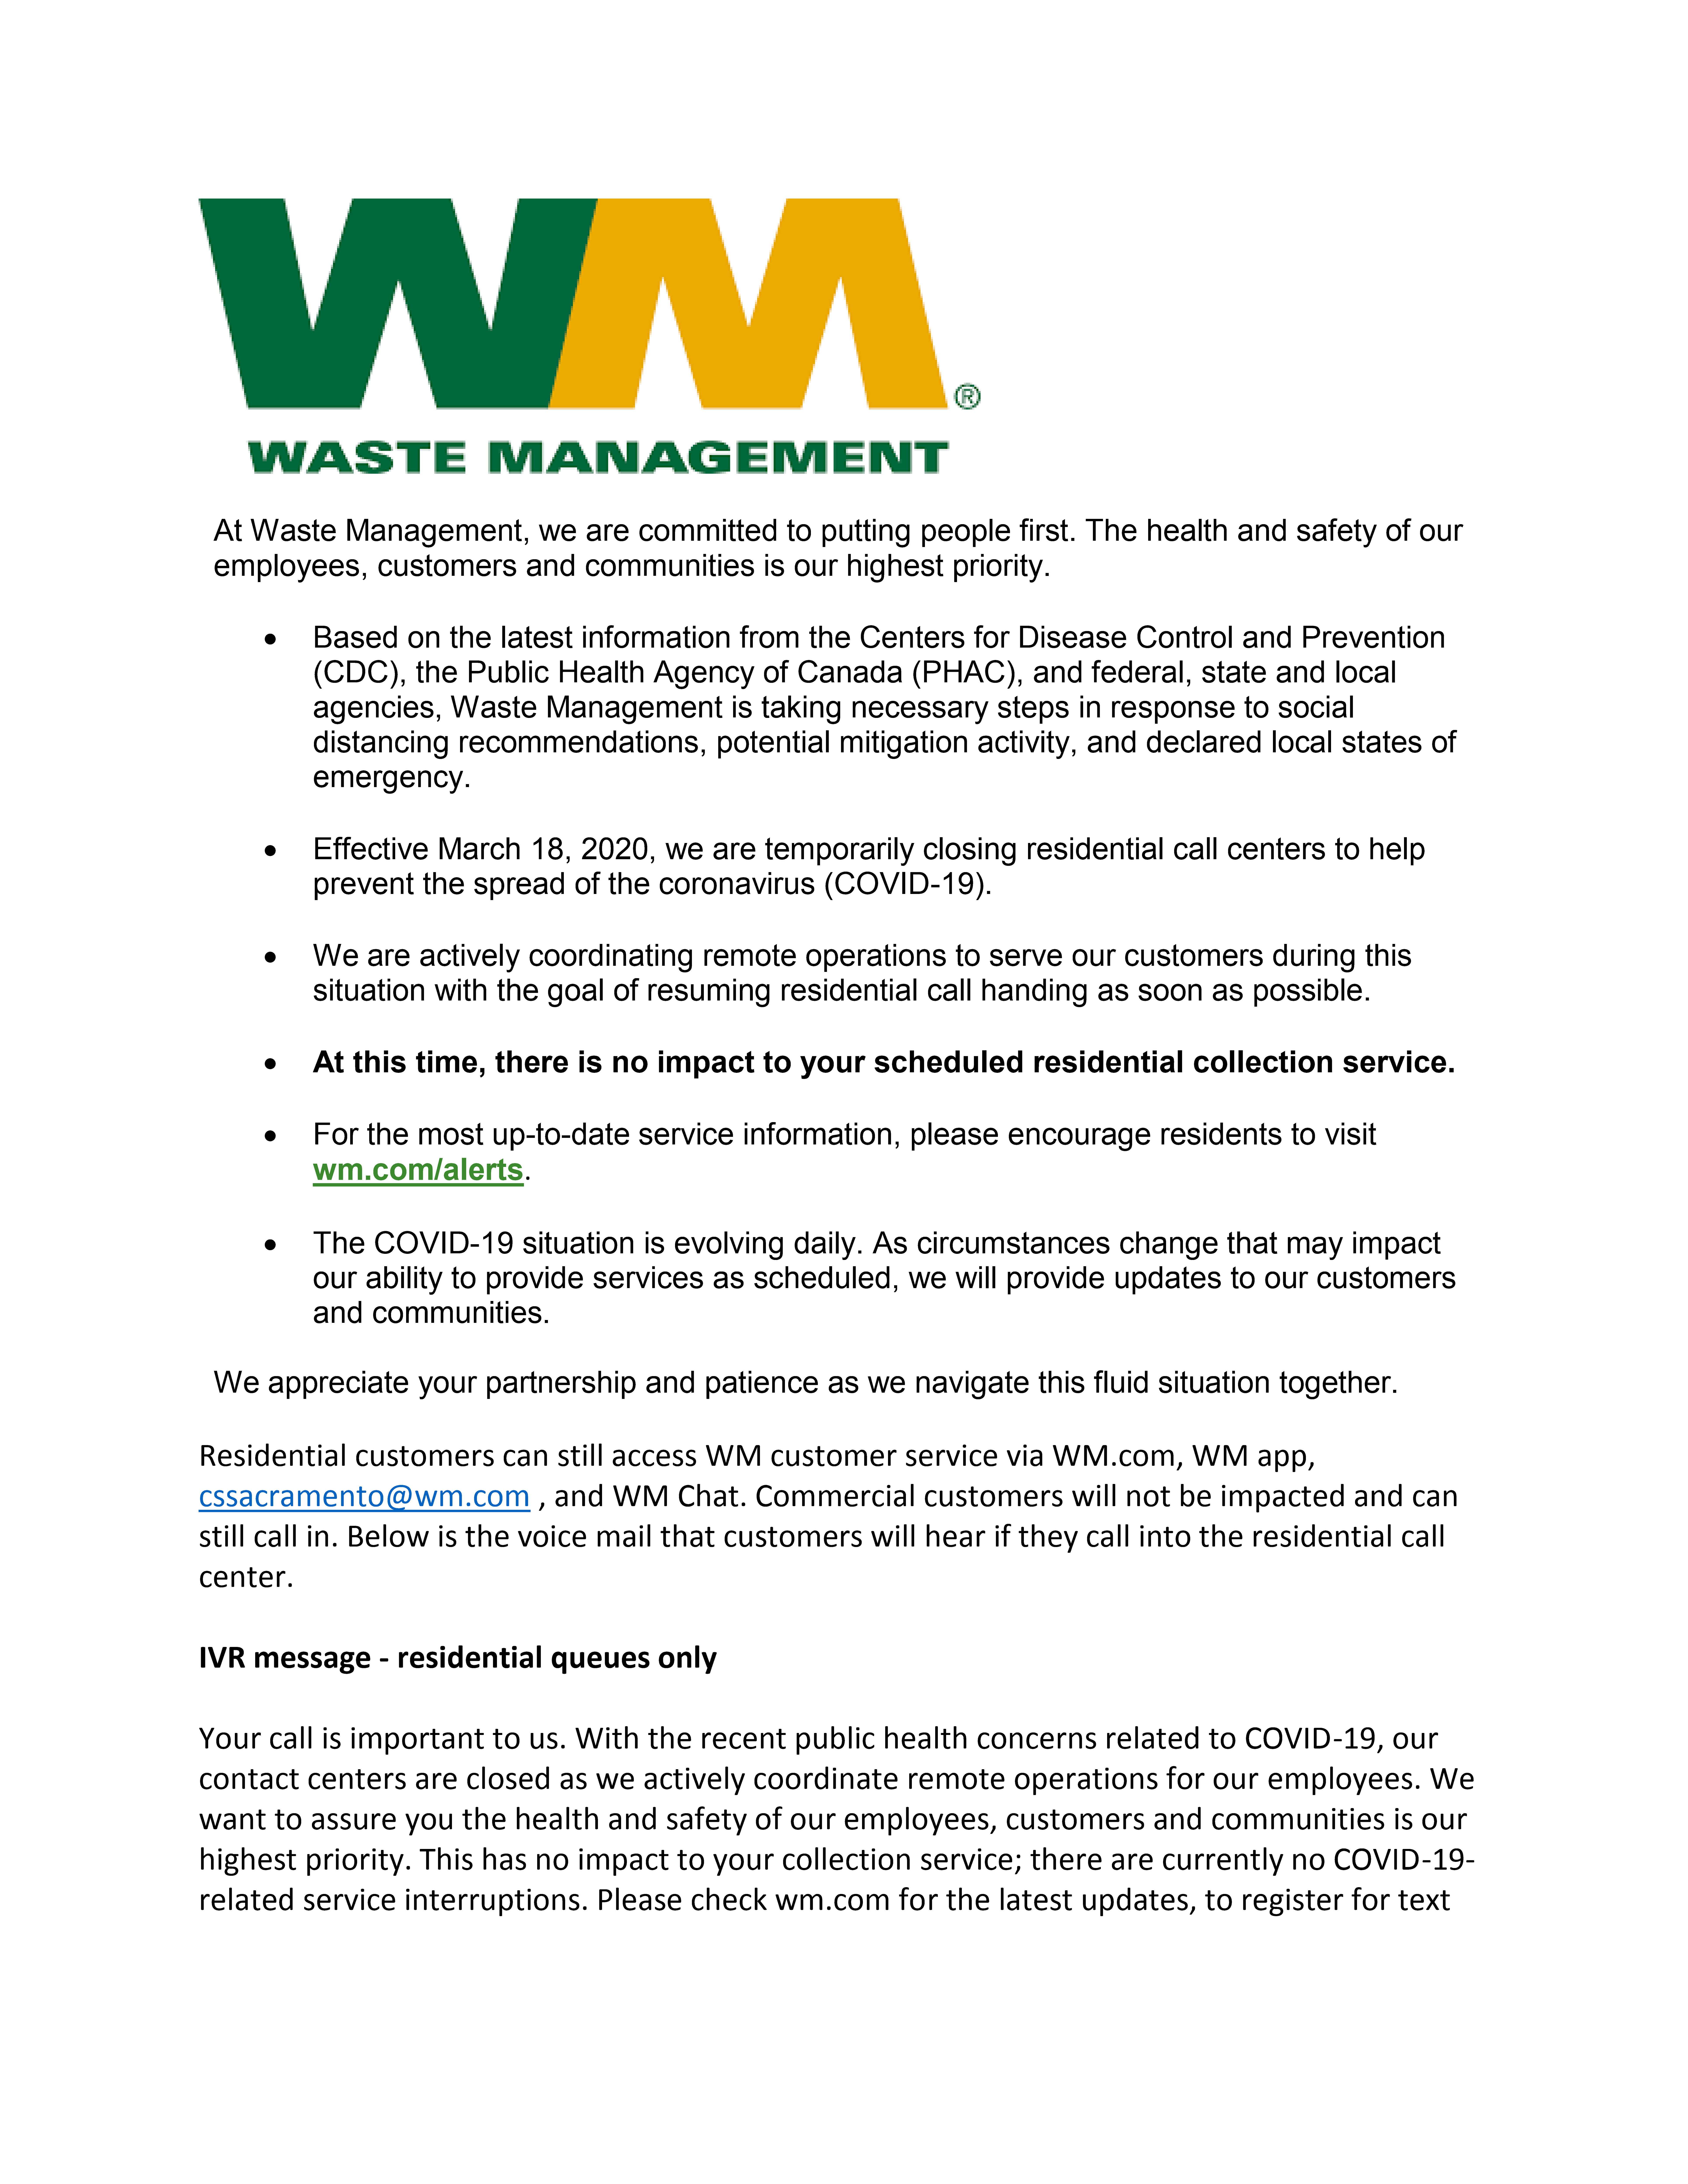 Image of Waste Management Notice Page 1 of 2